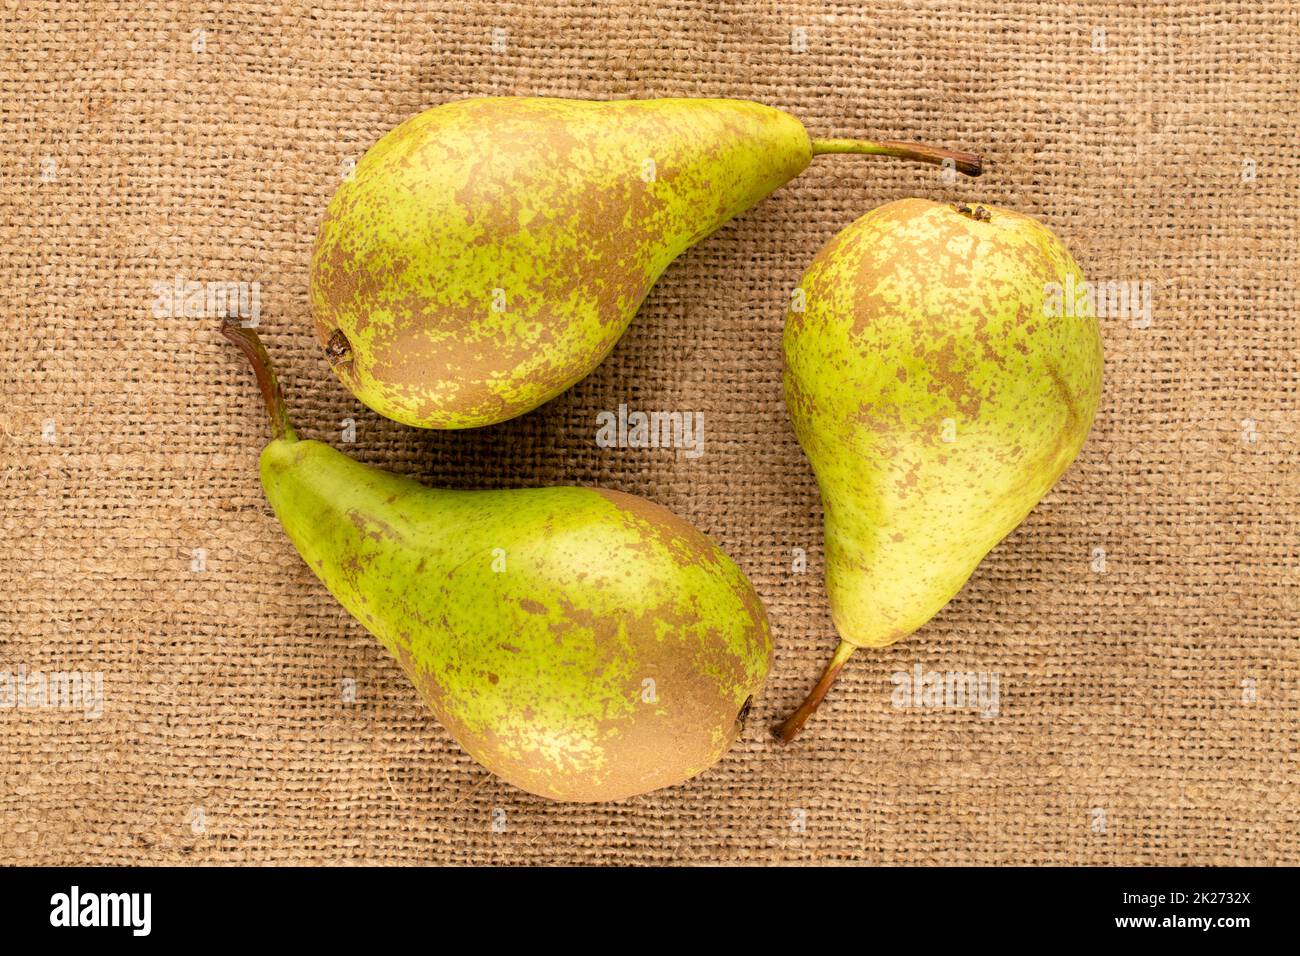 Thre juicy pears on a jute cloth, macro, top view. Stock Photo